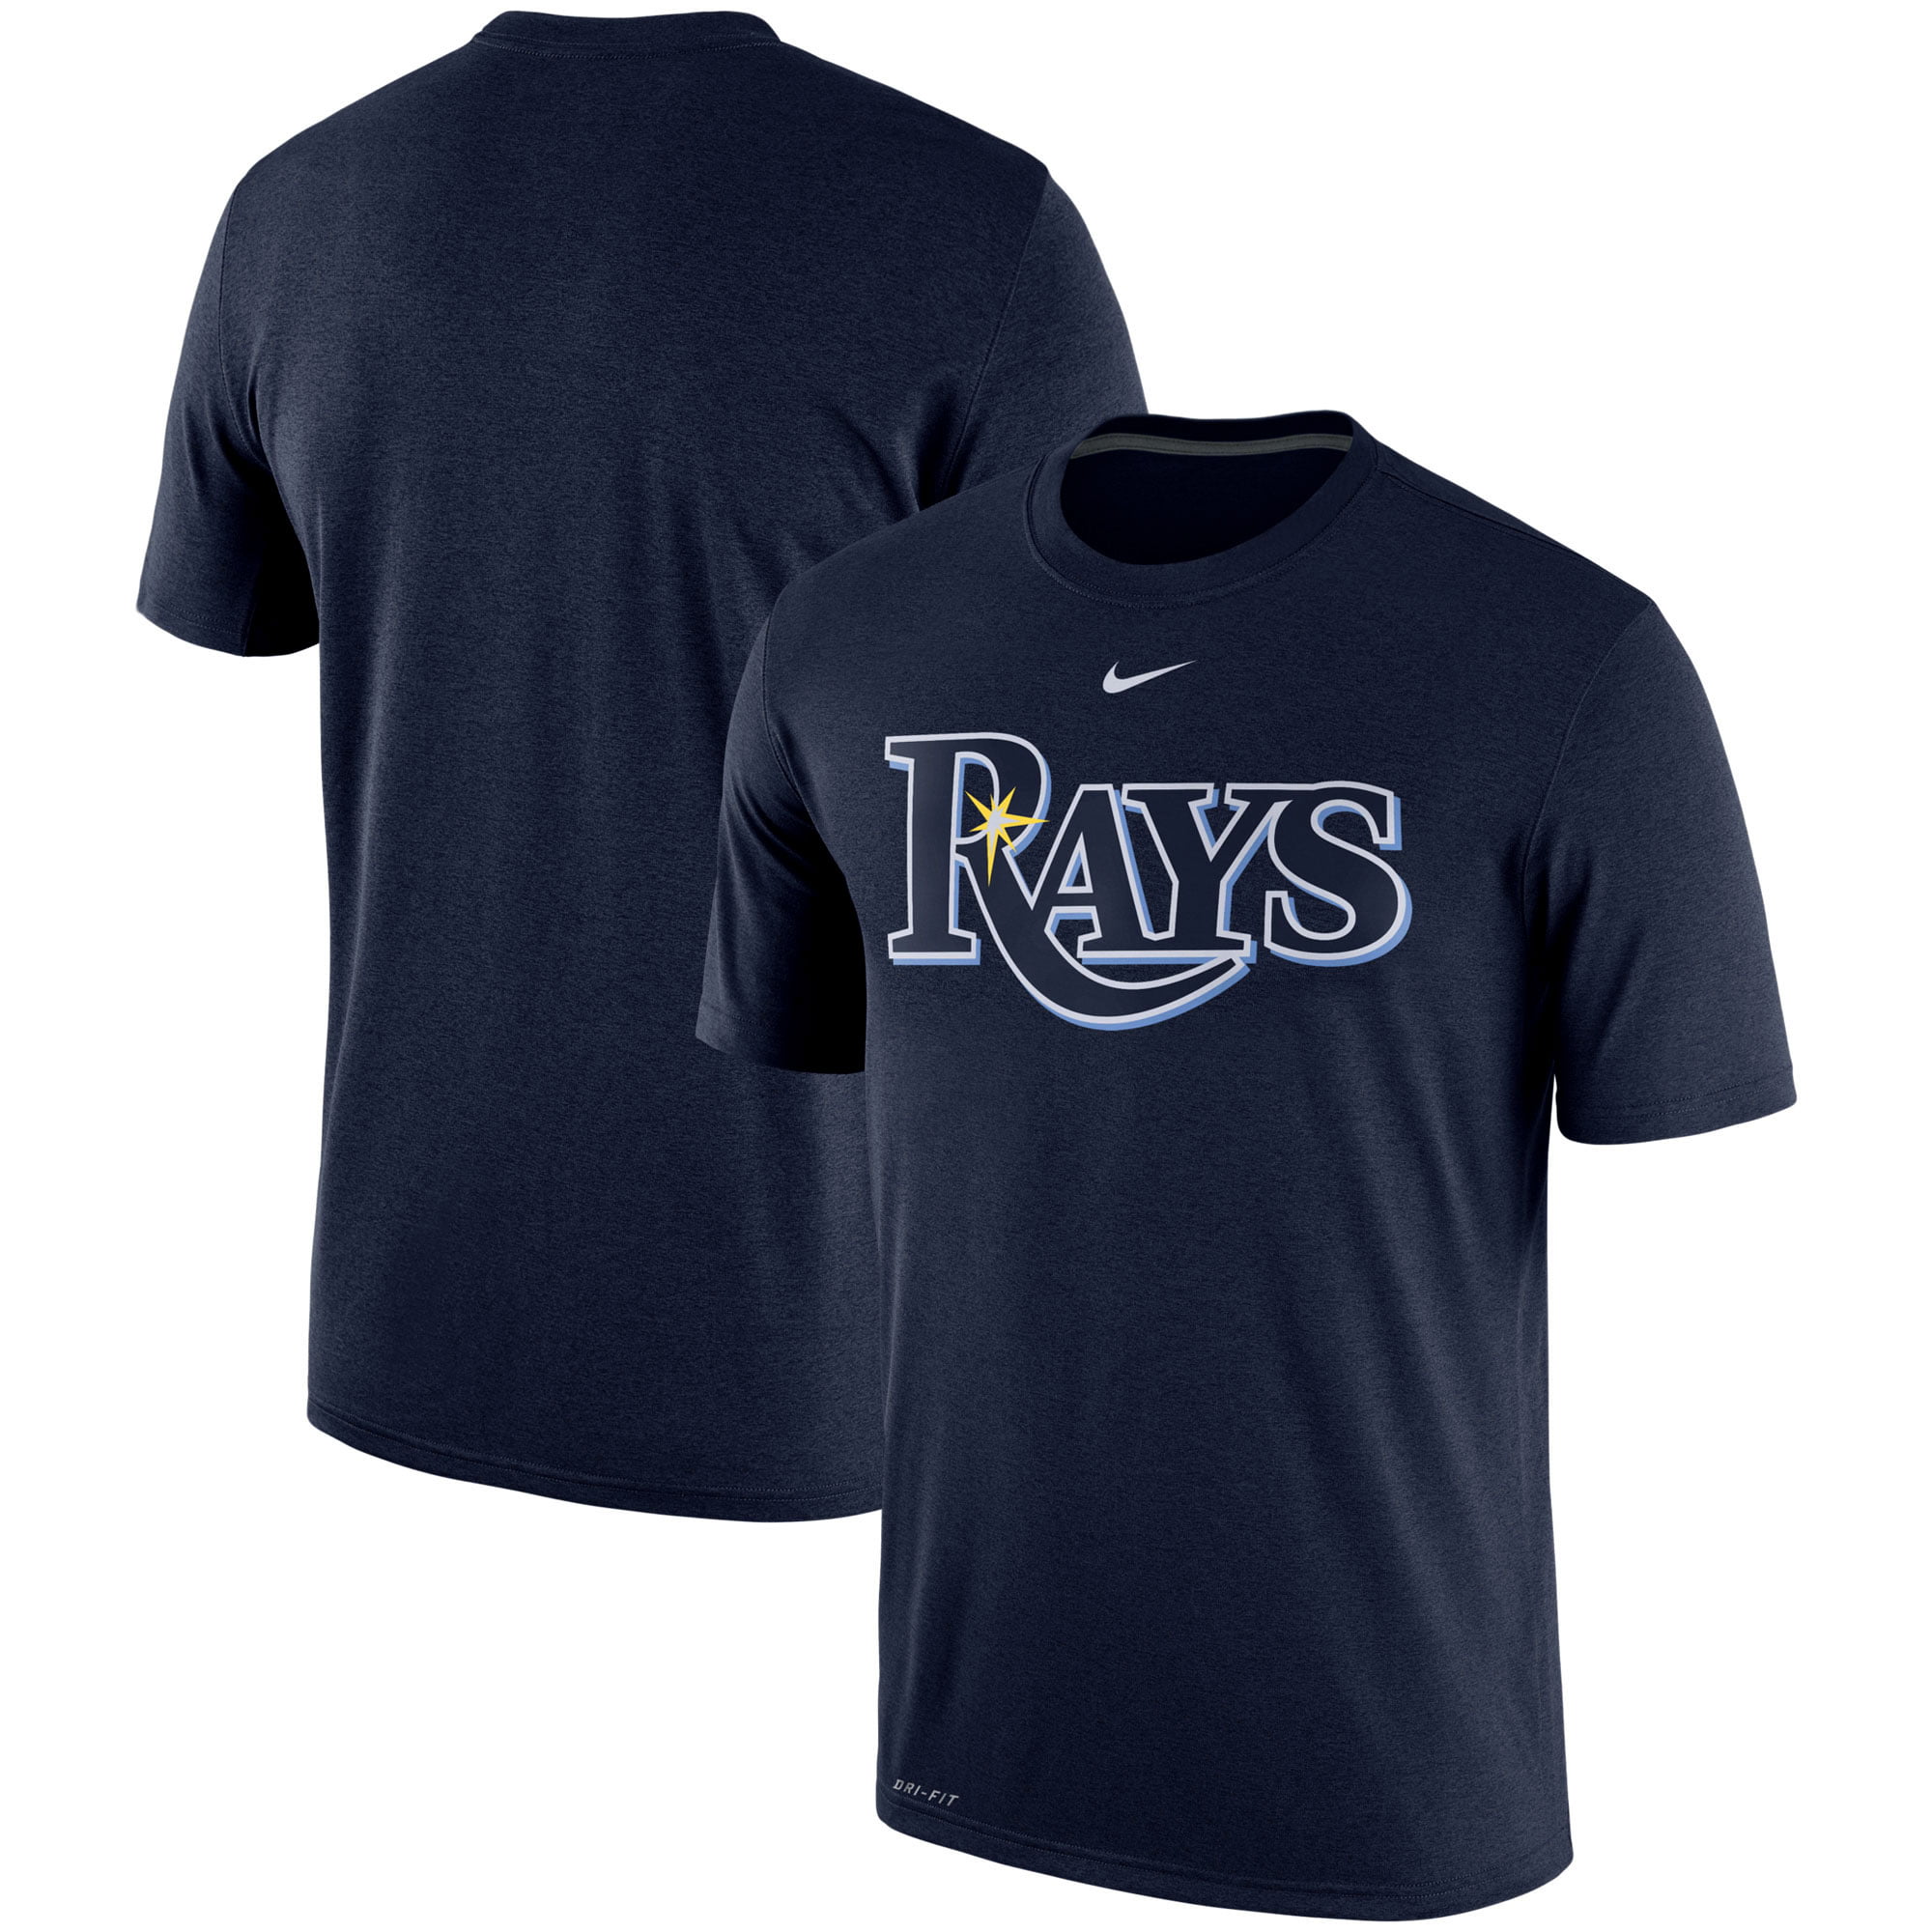 tampa bay rays batting practice jersey